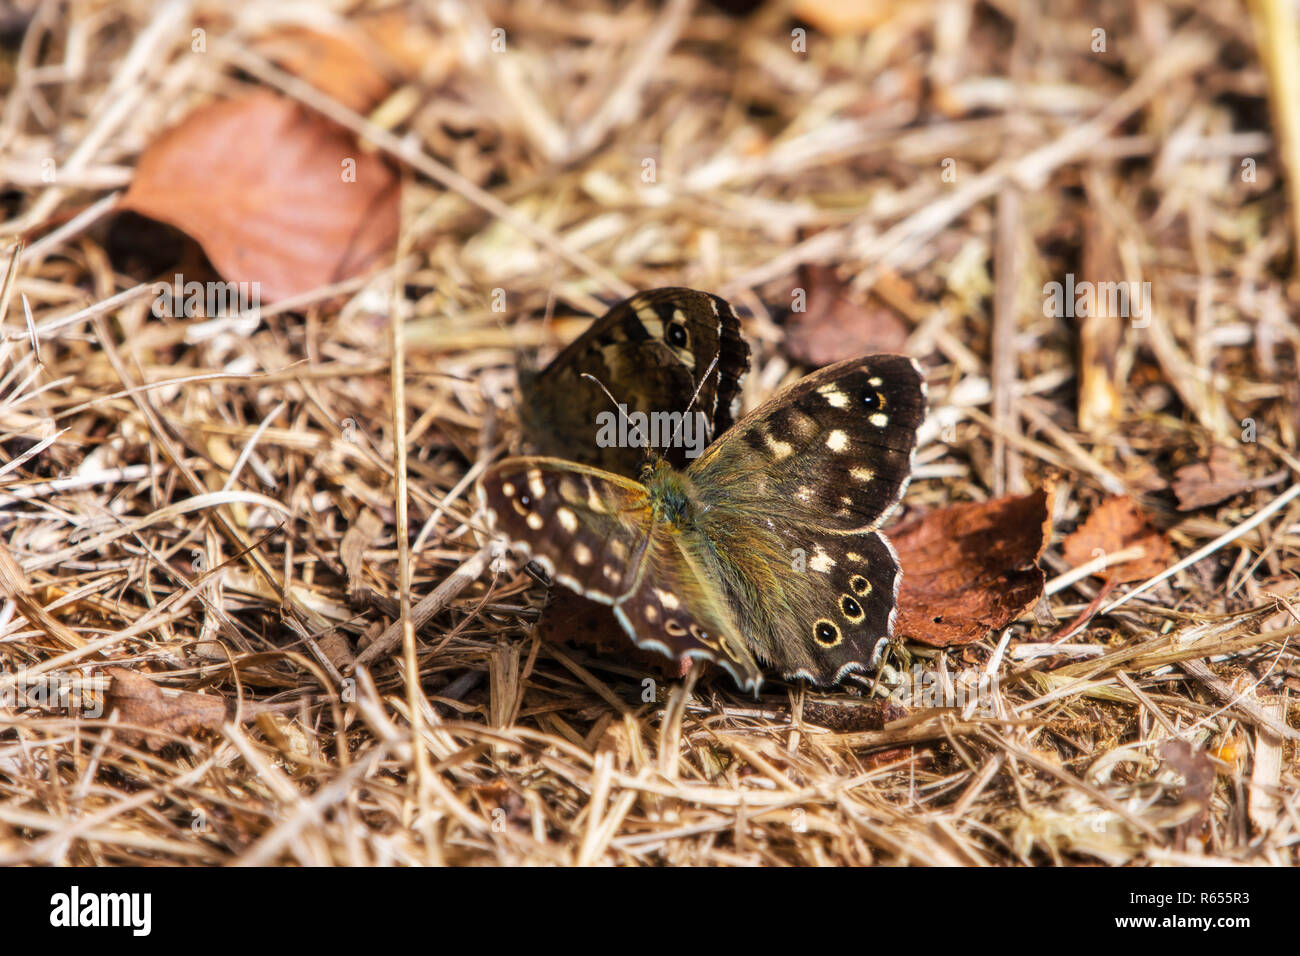 Speckled wood (Pararge aegeria) butterflies mating on the ground. Stock Photo